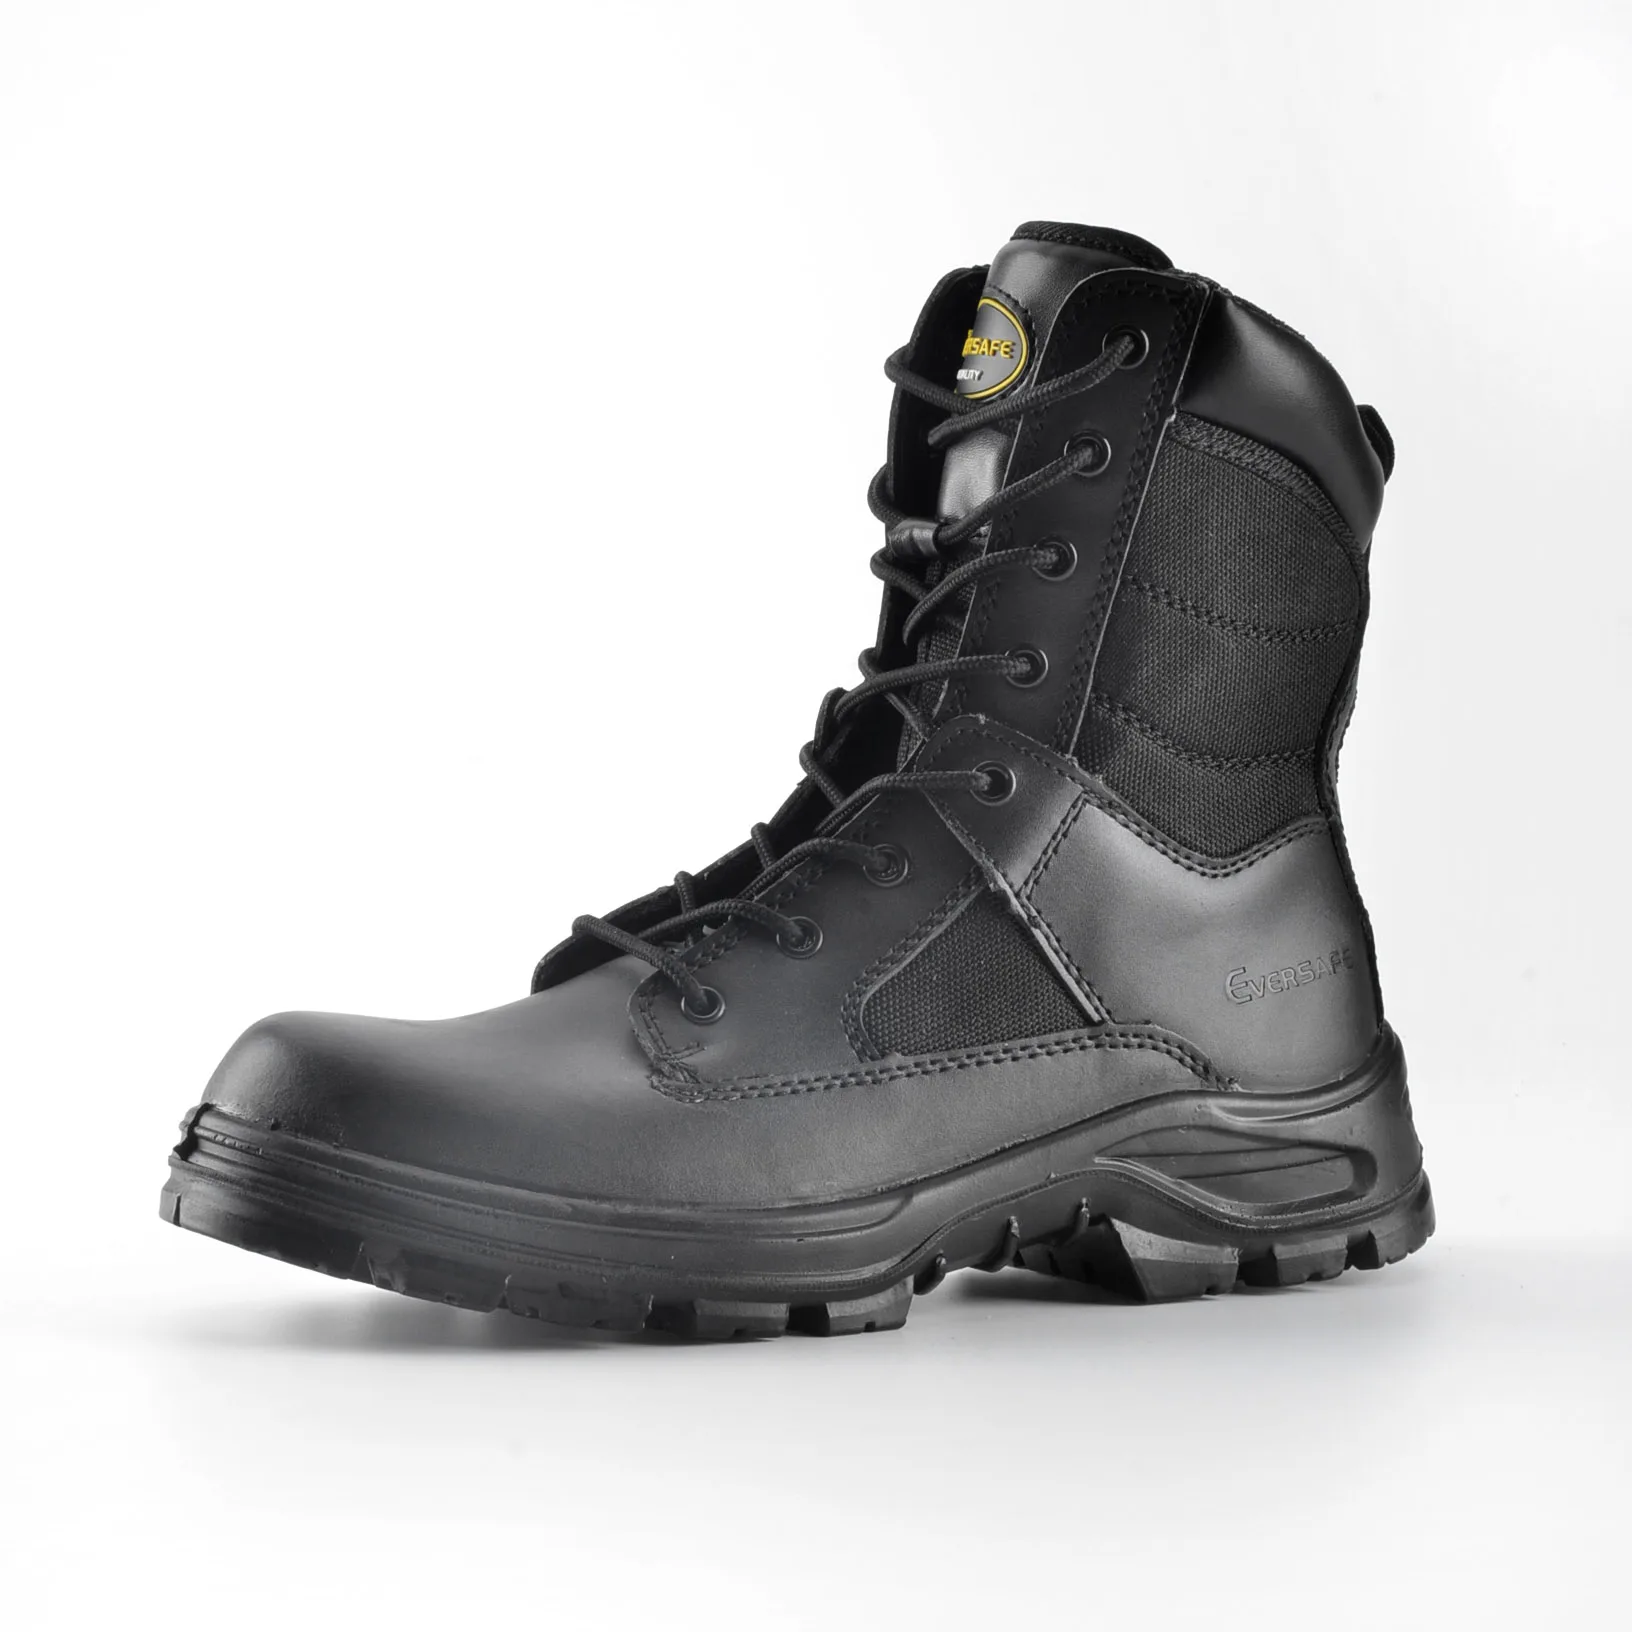 black security work boots